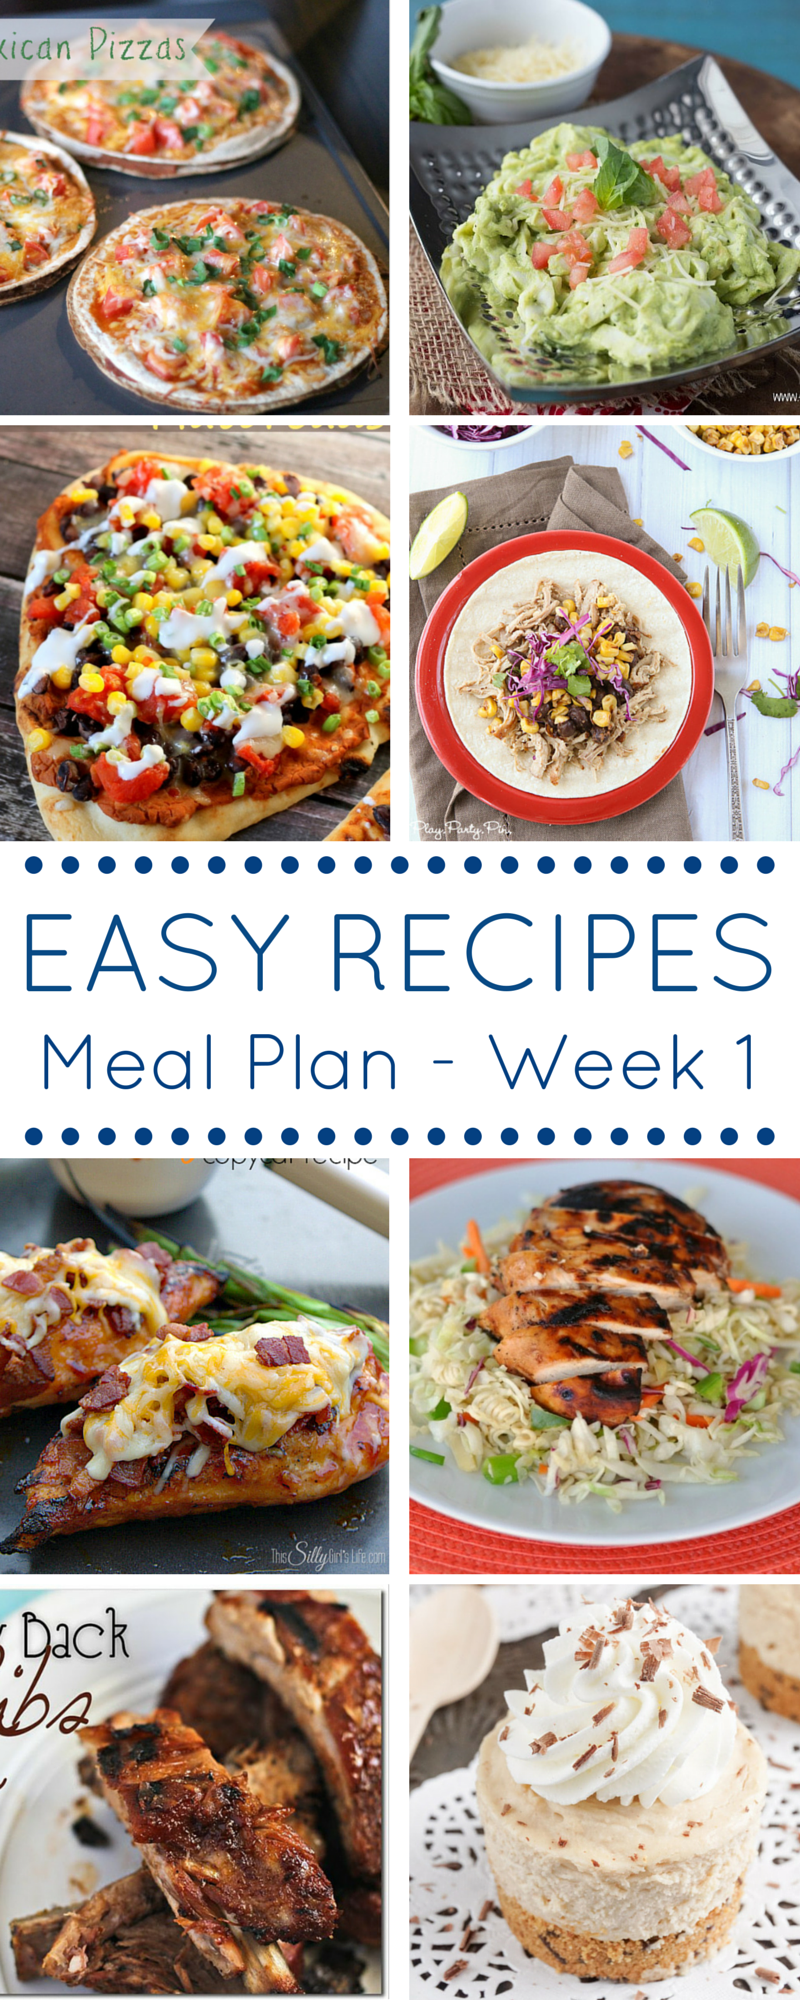 The Easy Dinner Recipes Meal Plan - Week 1 - My Suburban Kitchen